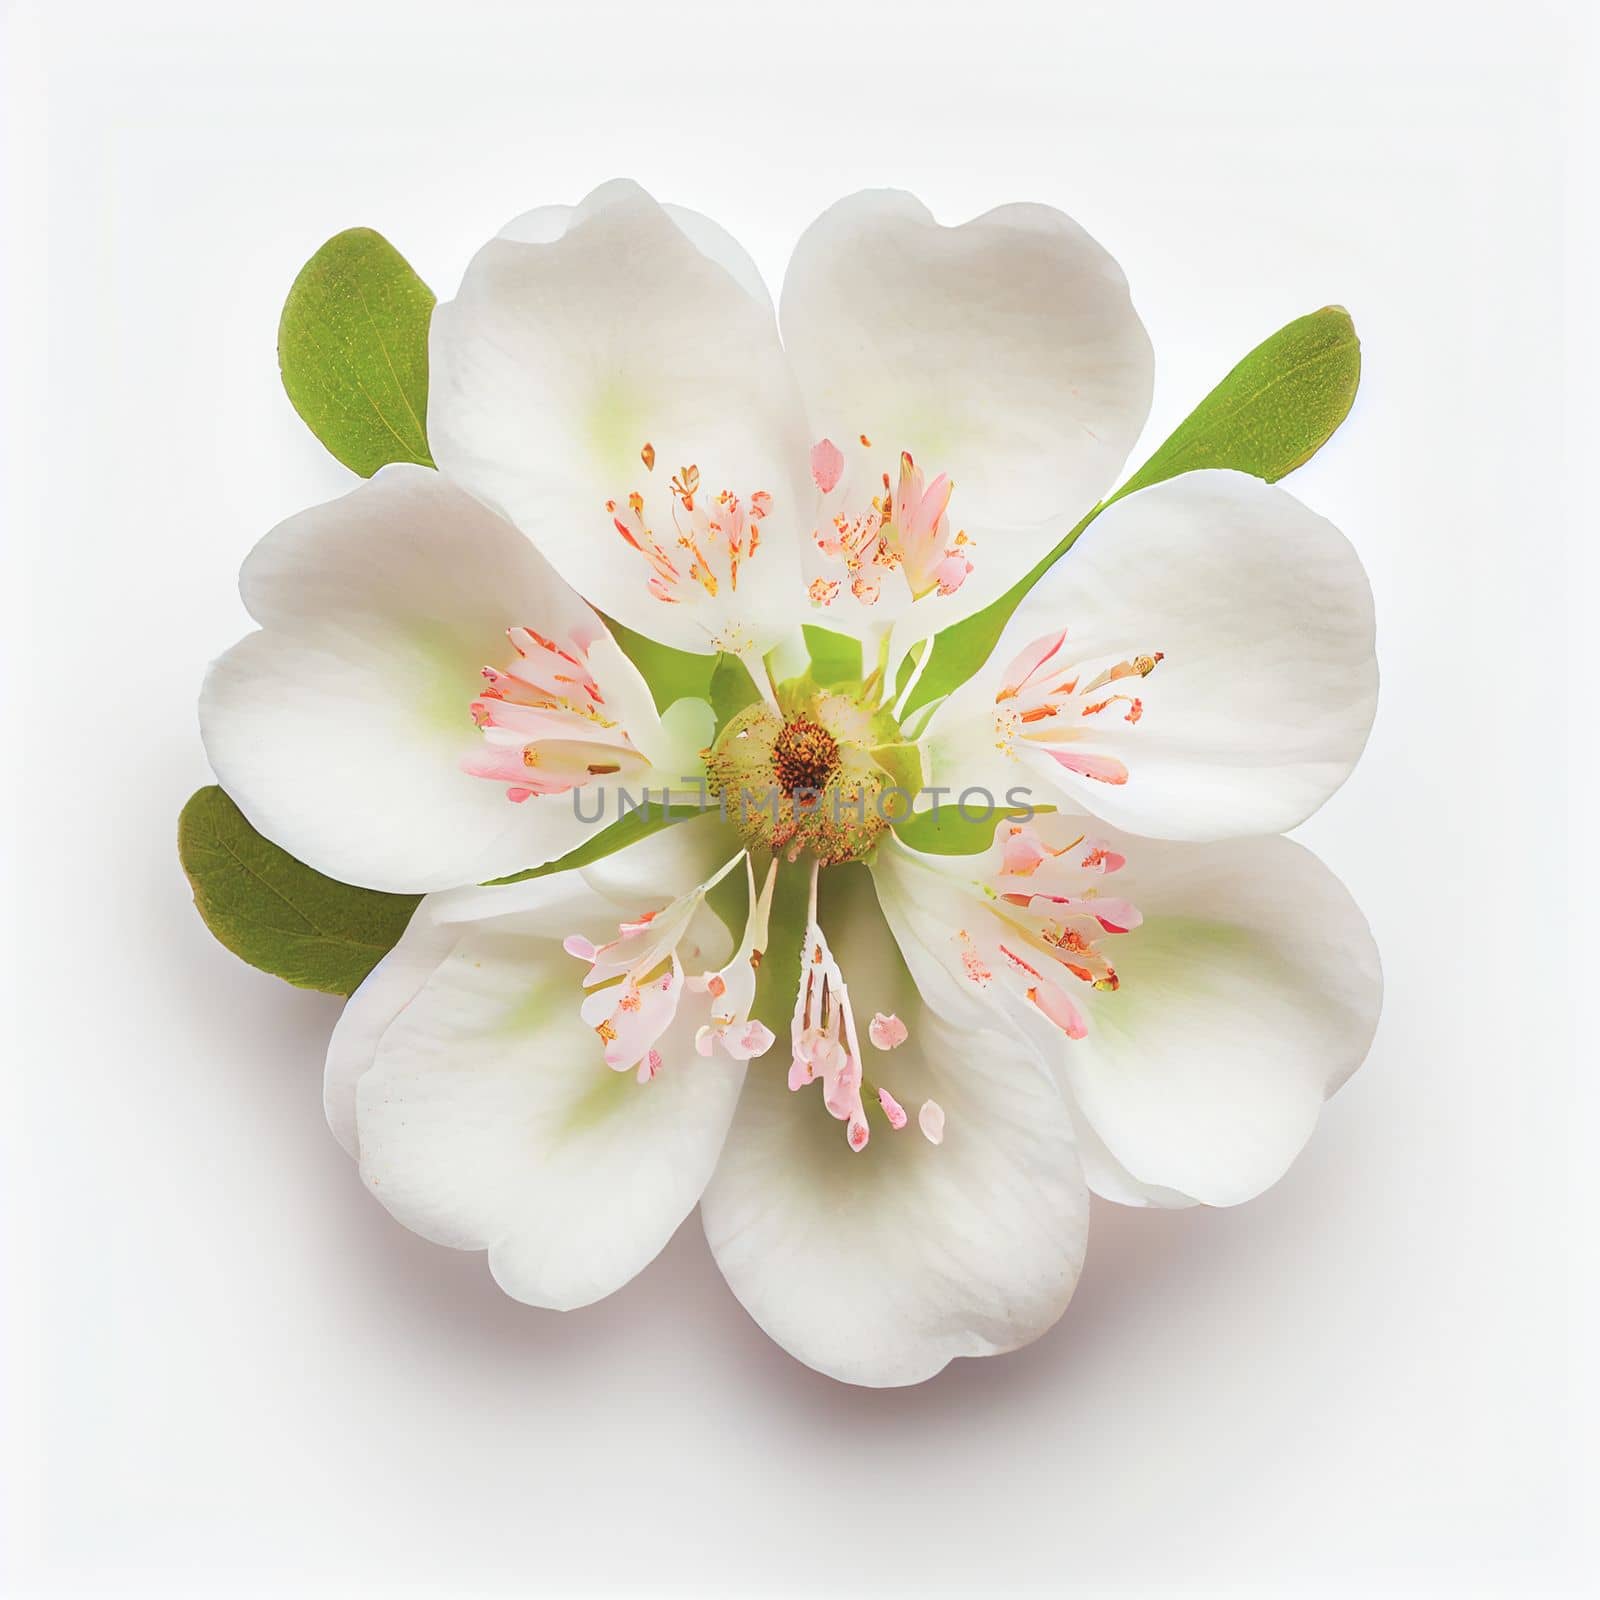 Top view a Apple blossom flower isolated on a white background, suitable for use on Valentine's Day cards, love letters, or springtime designs.